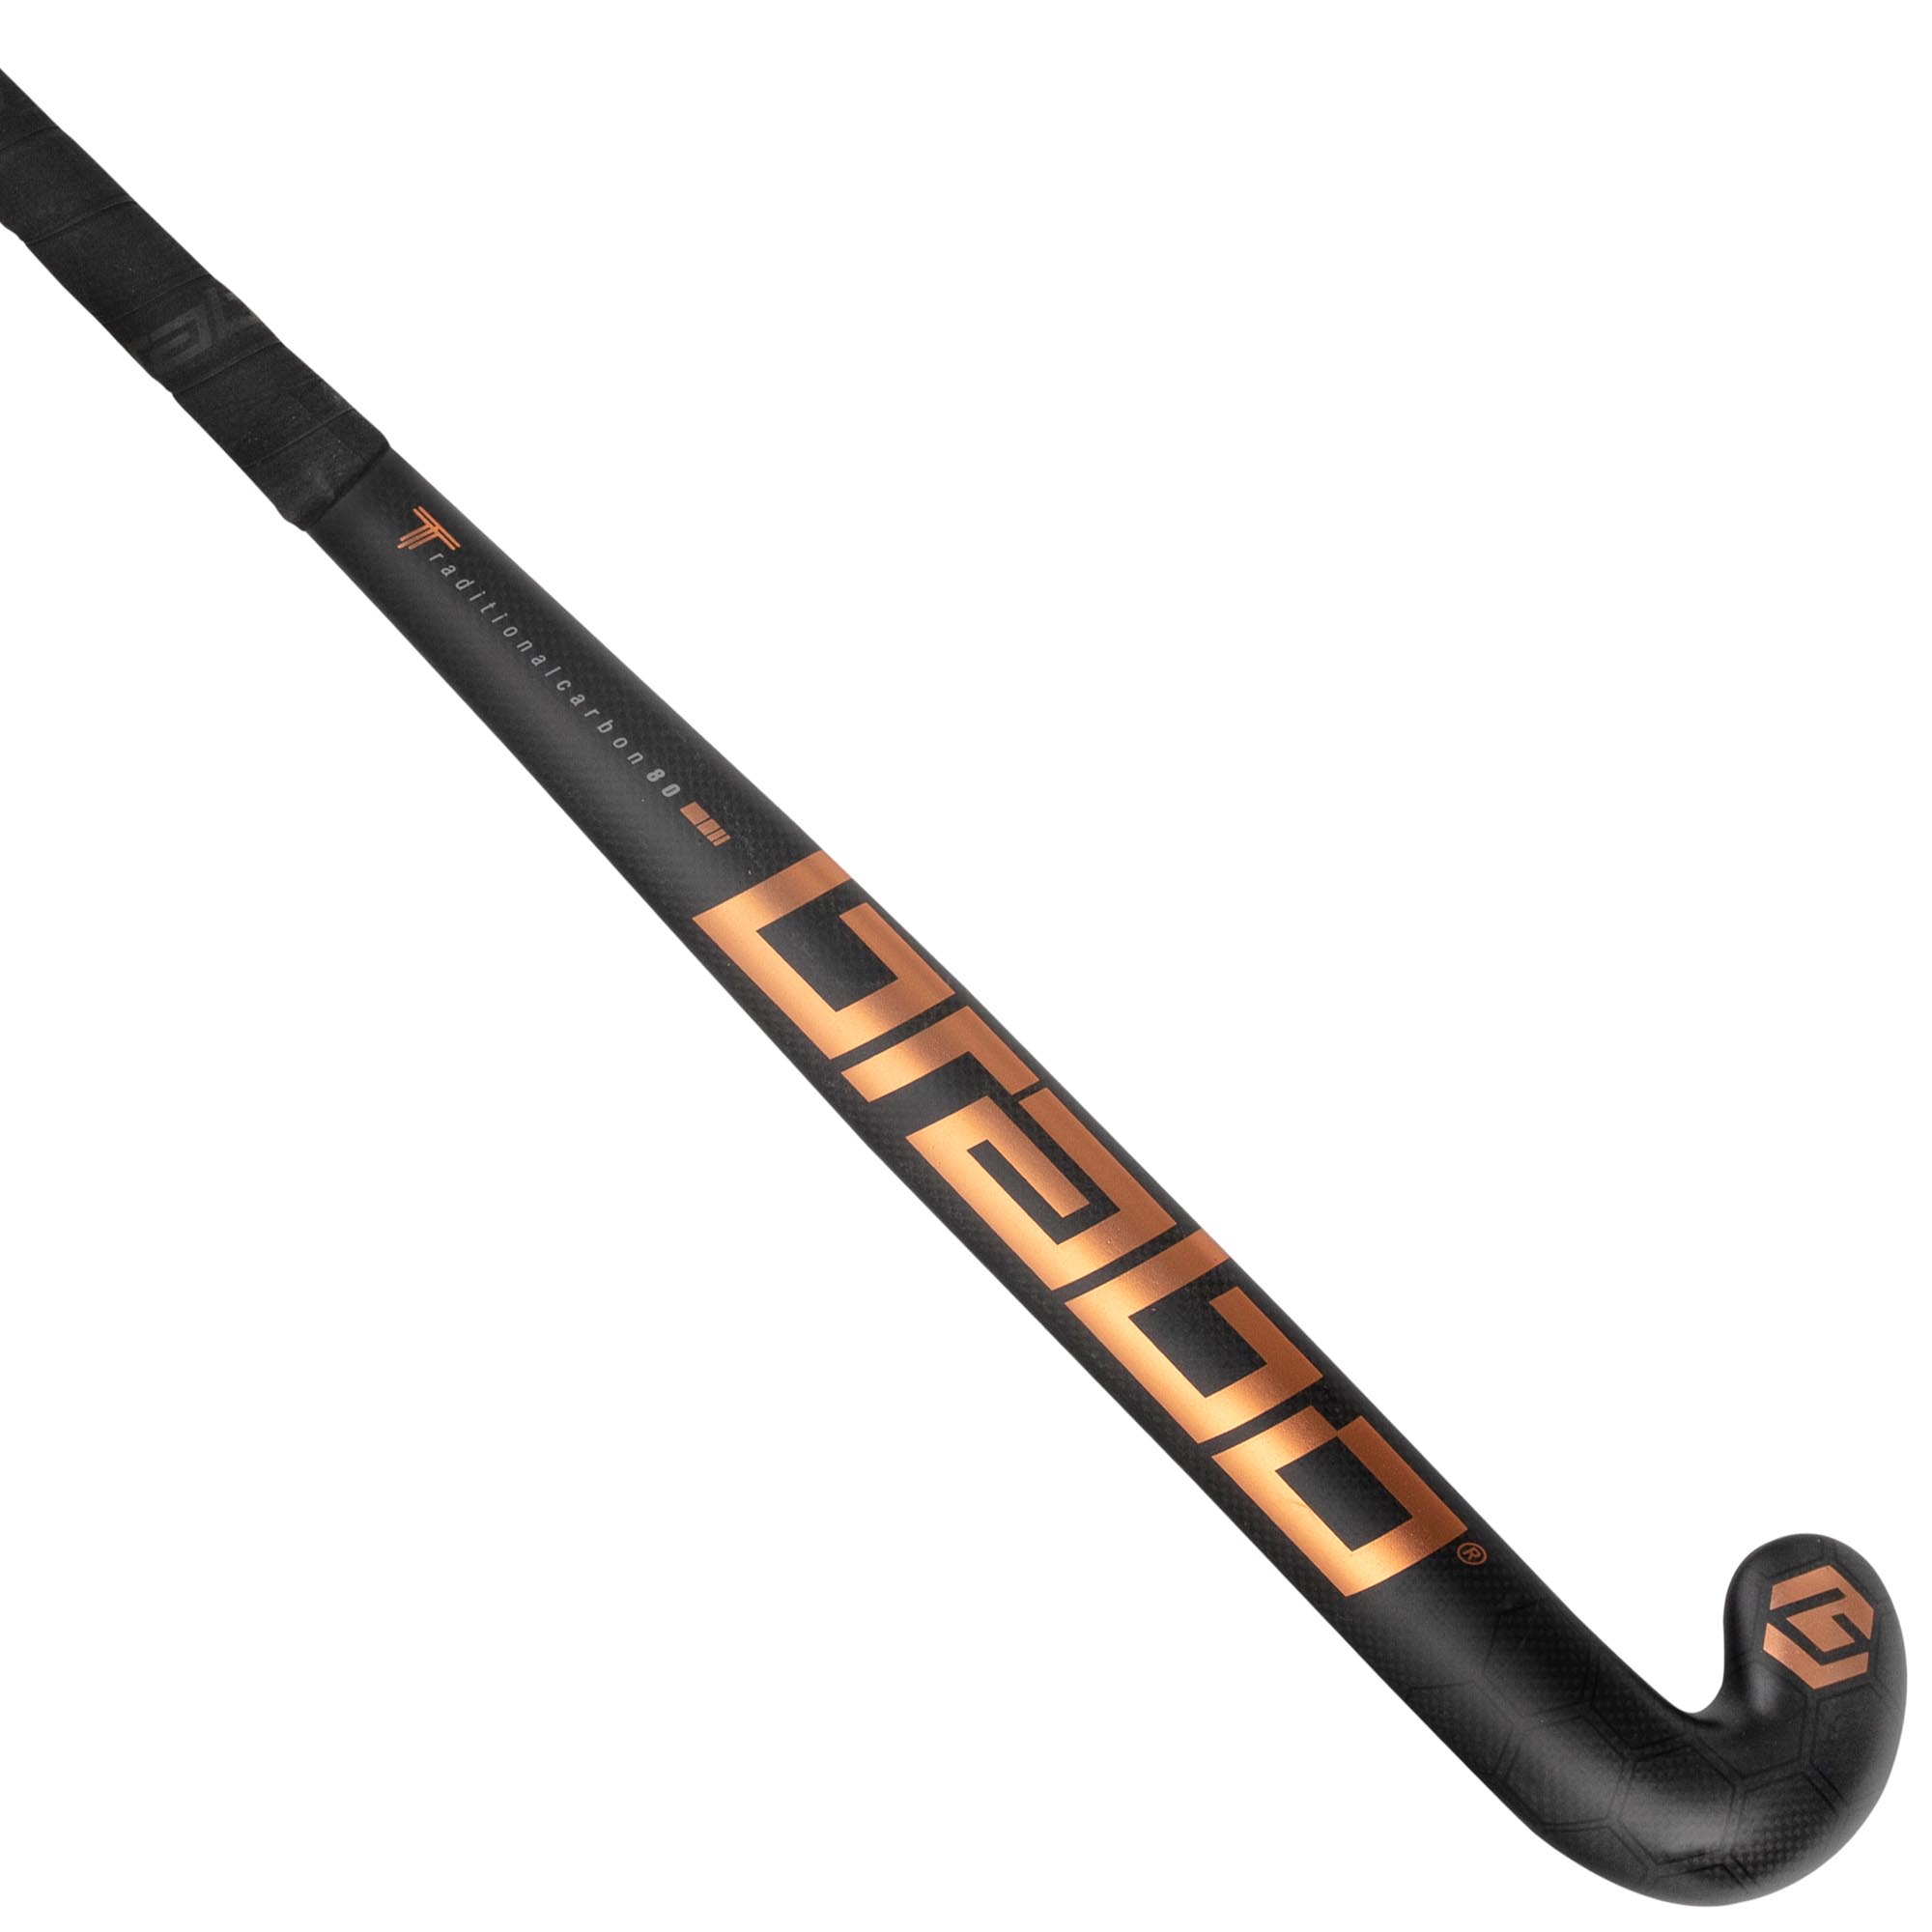 Brabo Traditional Carbon 80 Junior